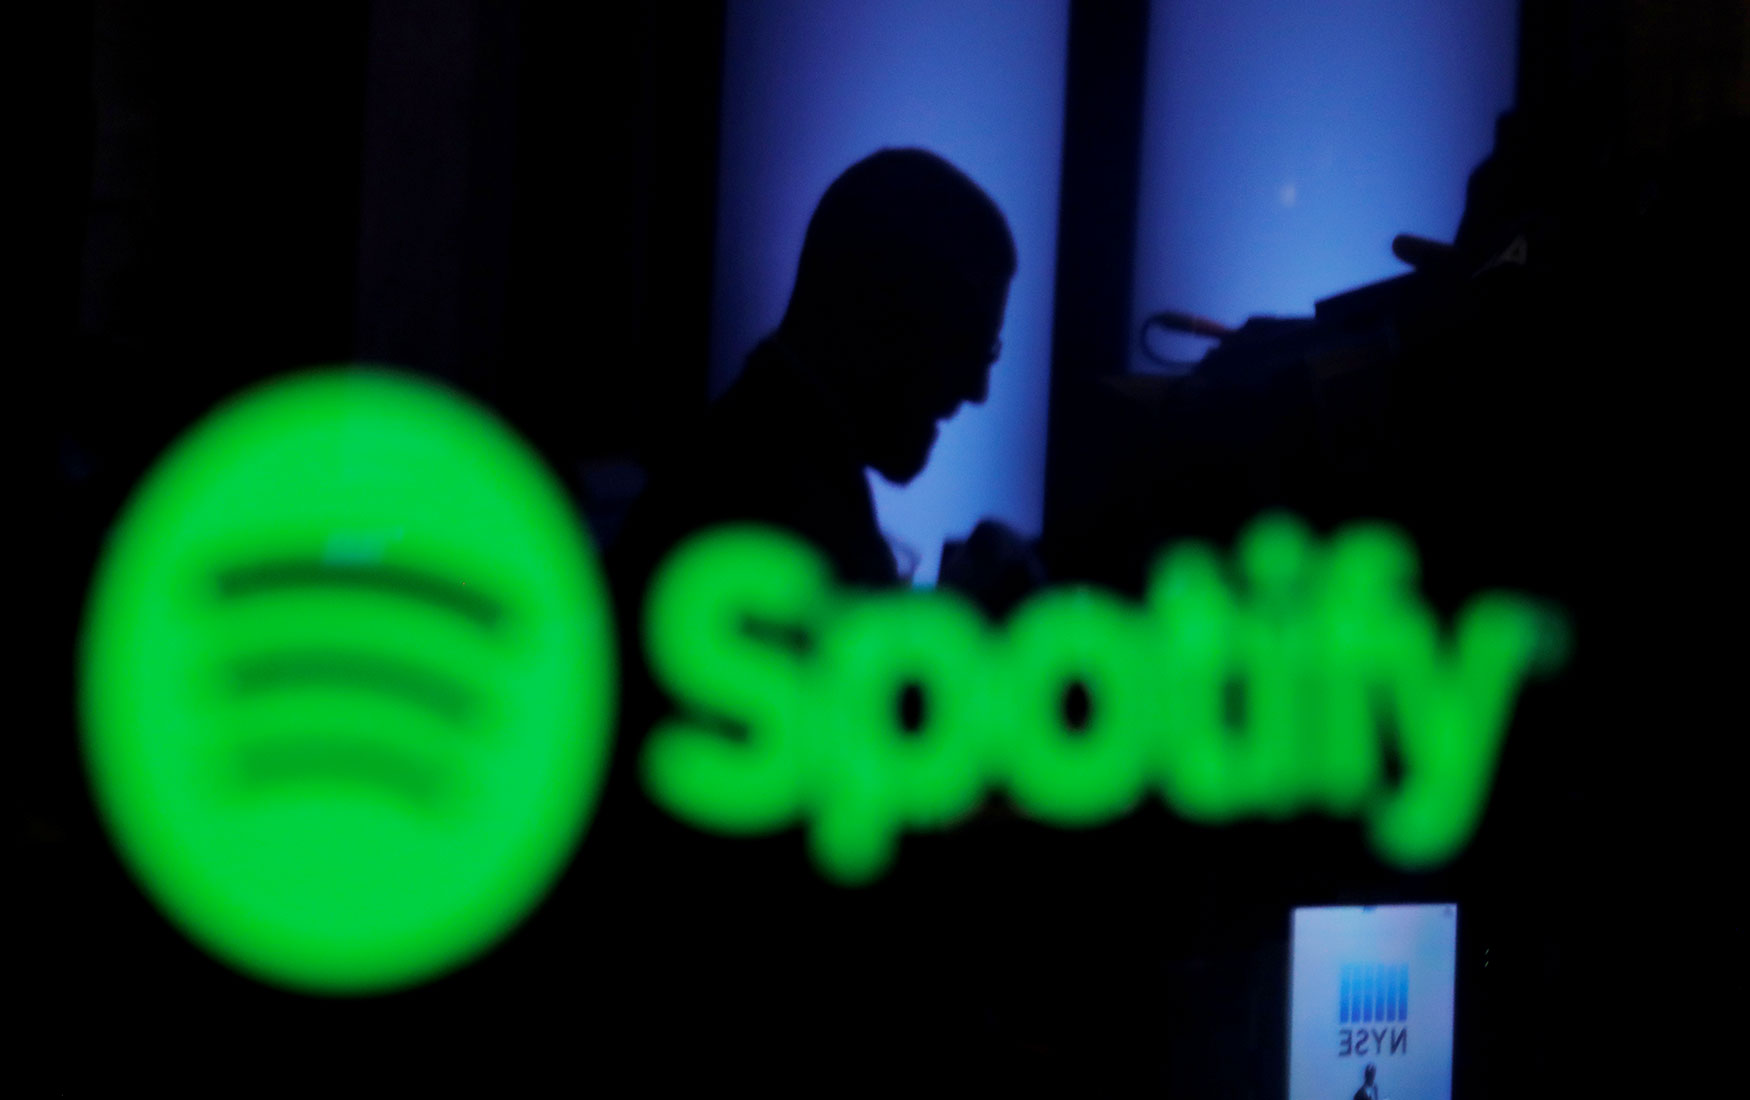   $30 :    Spotify     IPO